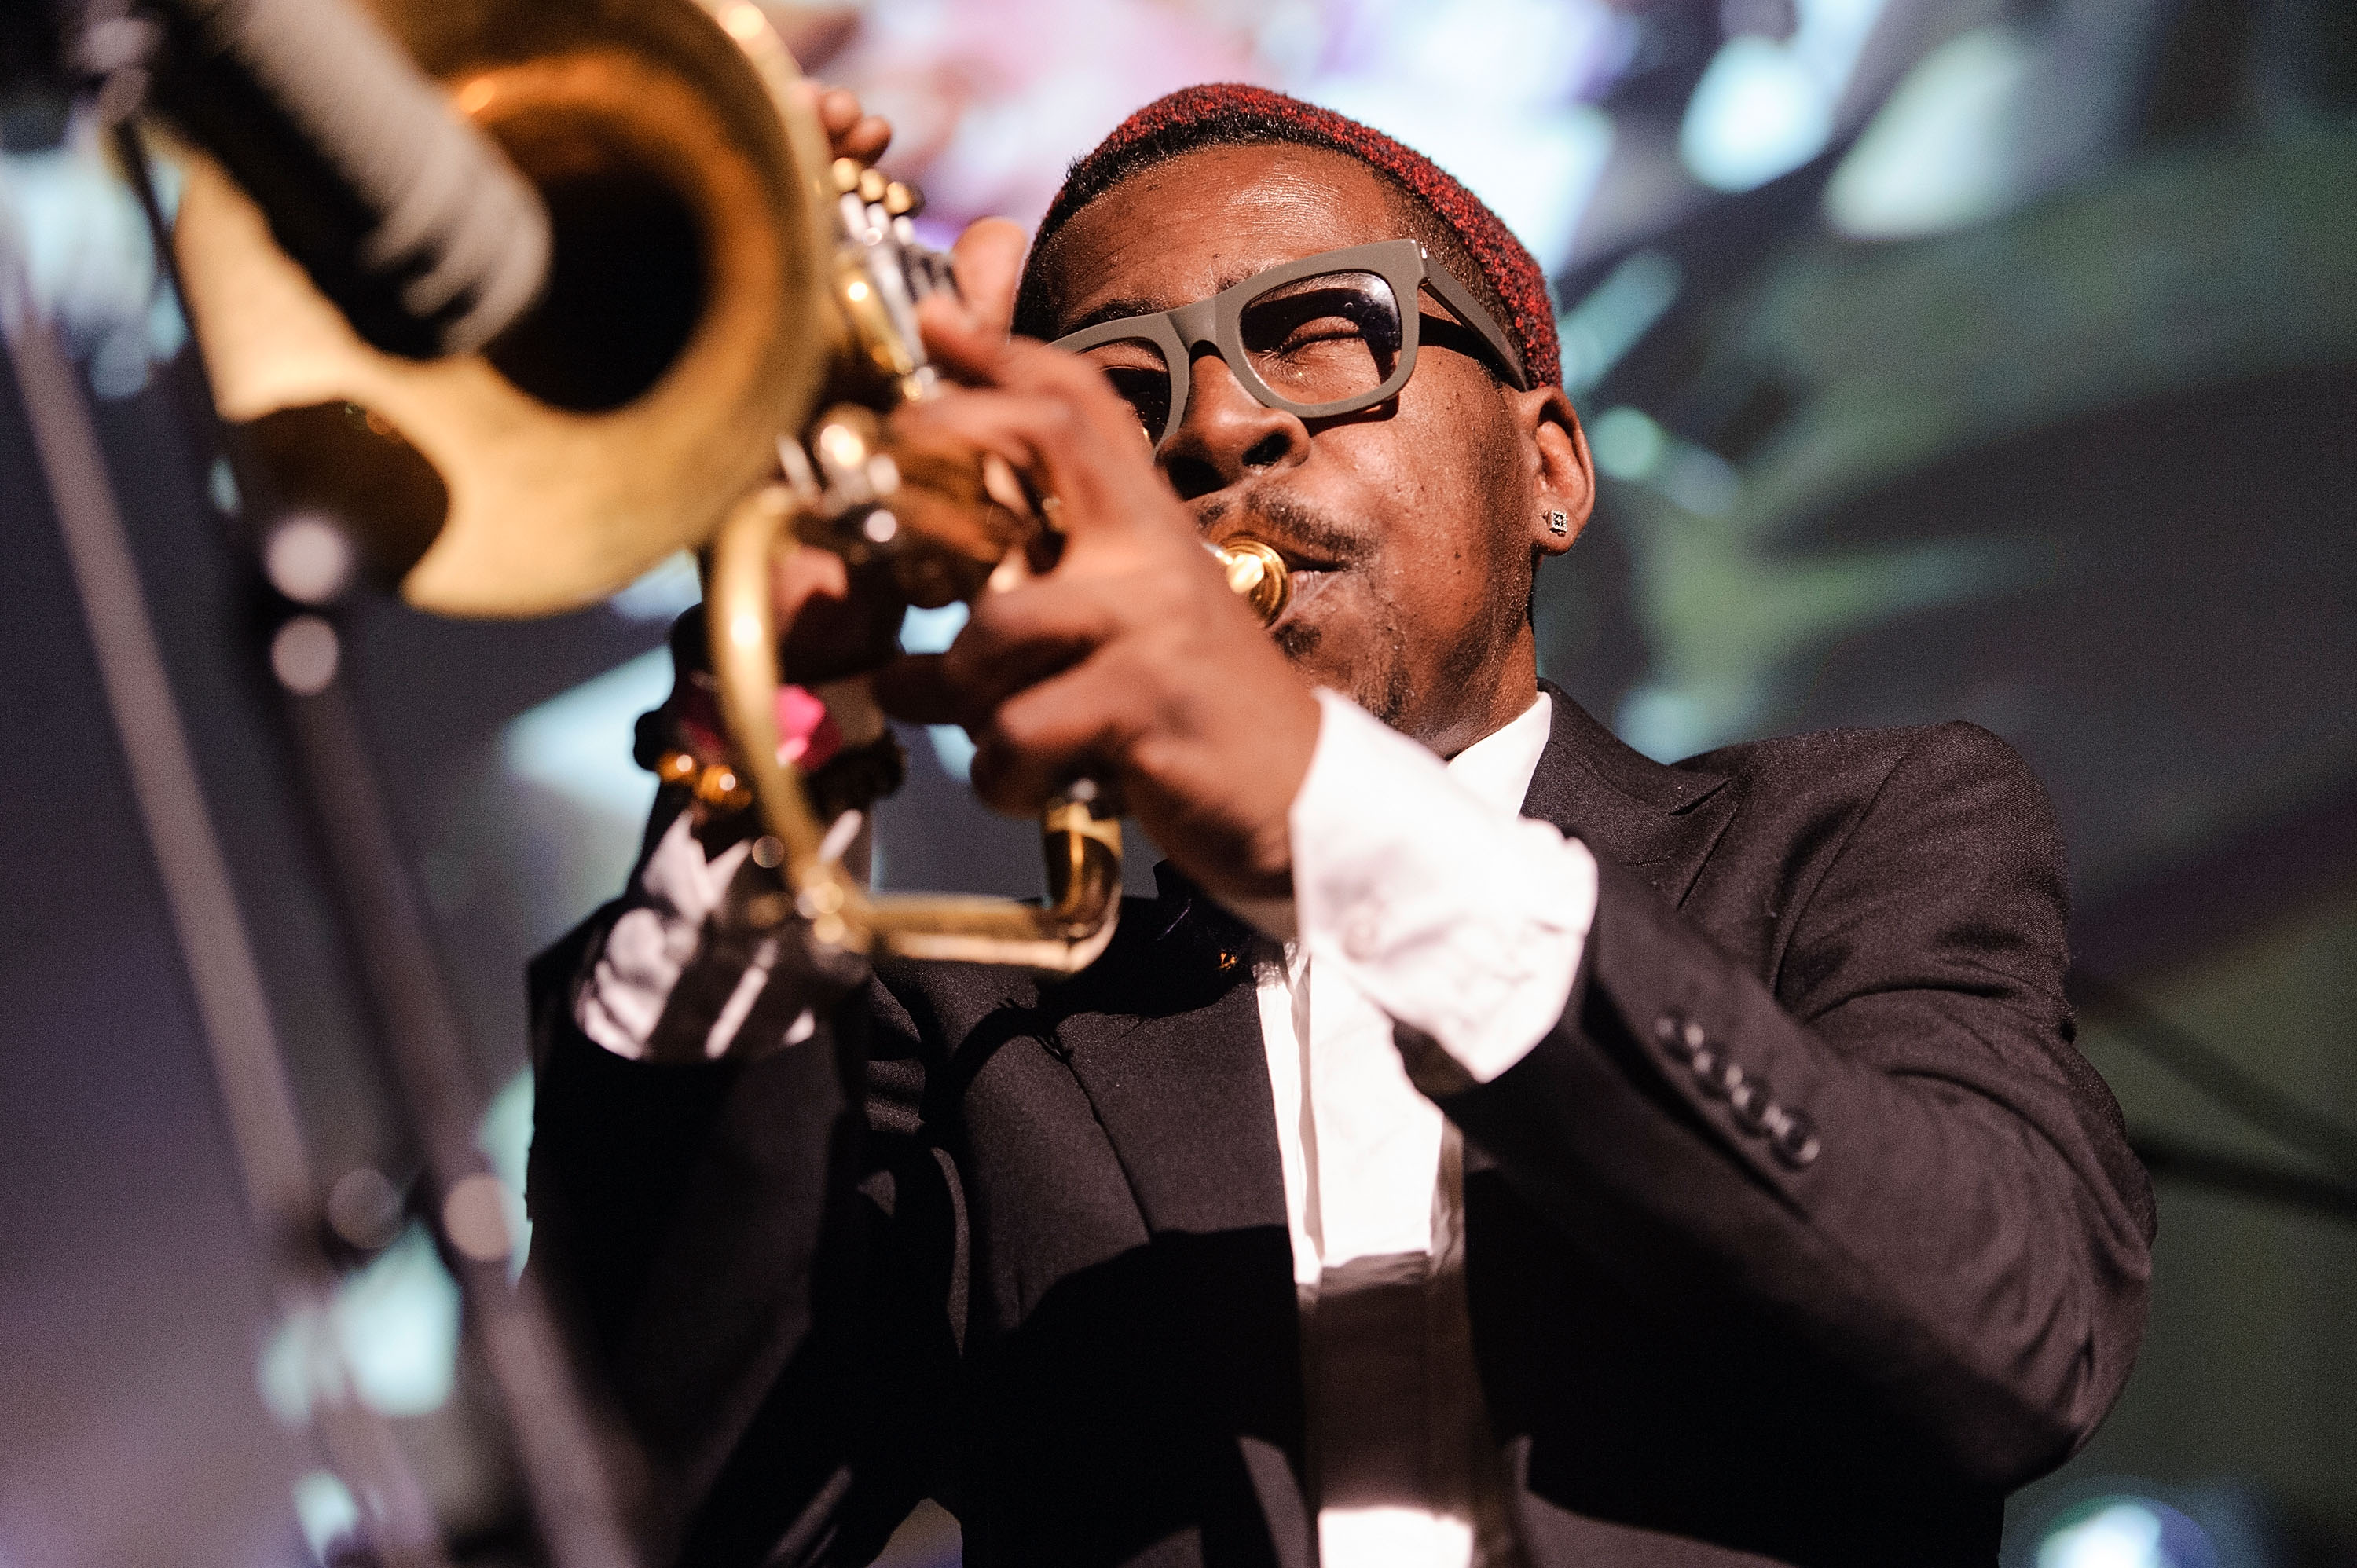 Roy Hargrove Cause of Death, Roy Hargrove dead, how old was roy hardgrove, how did roy hargrove die